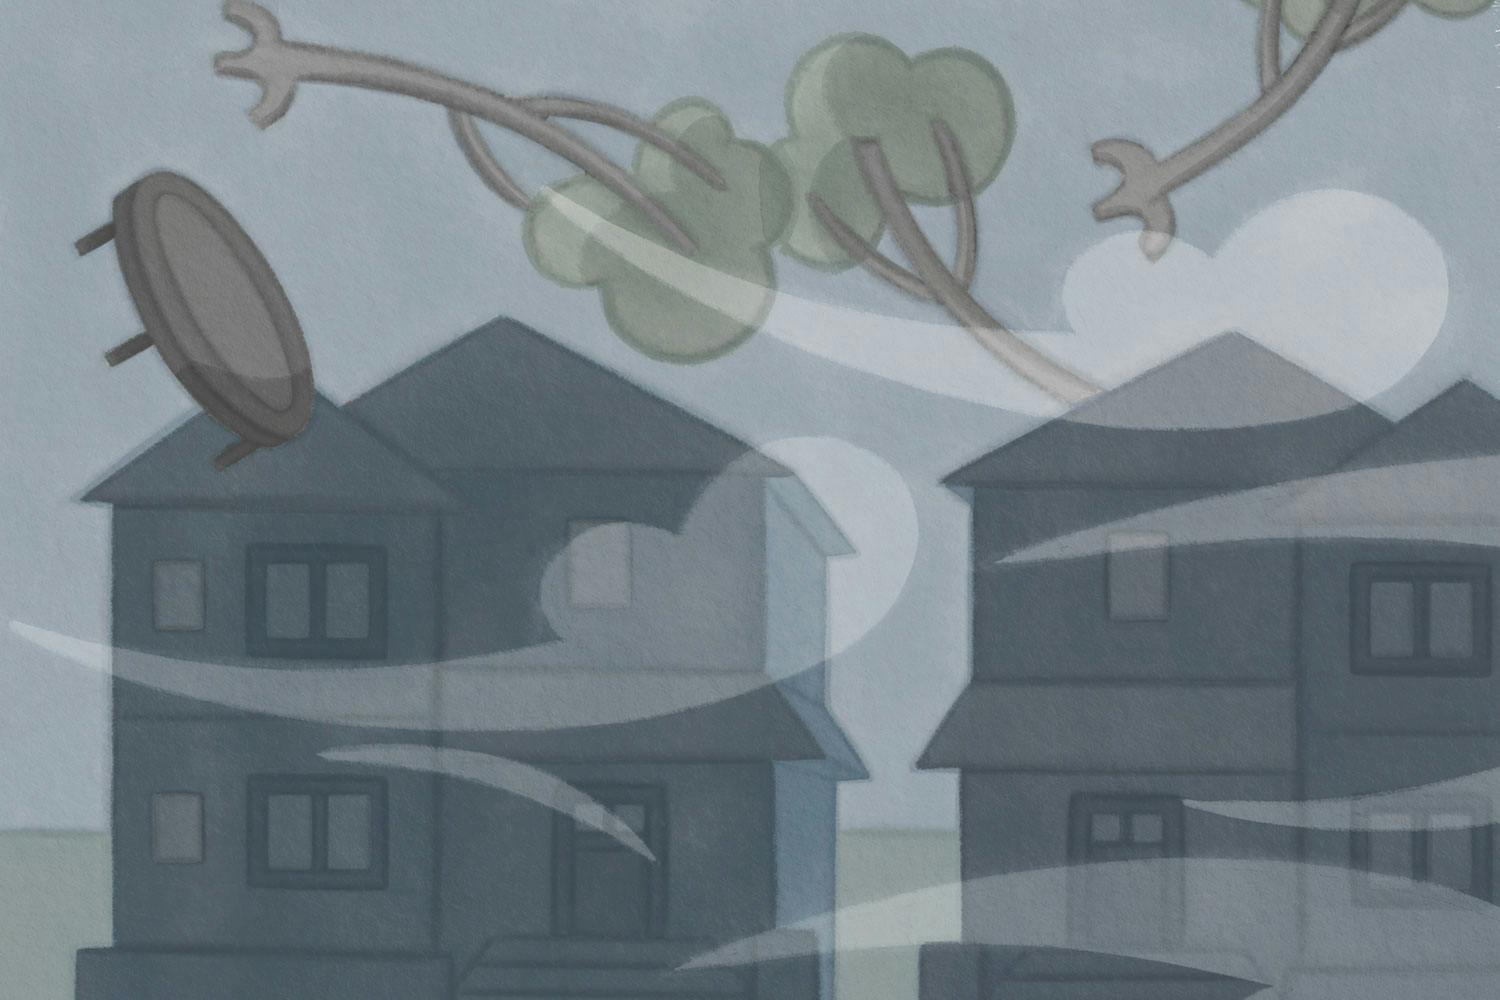 Illustration—Whirling winds lift a trampoline and trees above a row of homes.